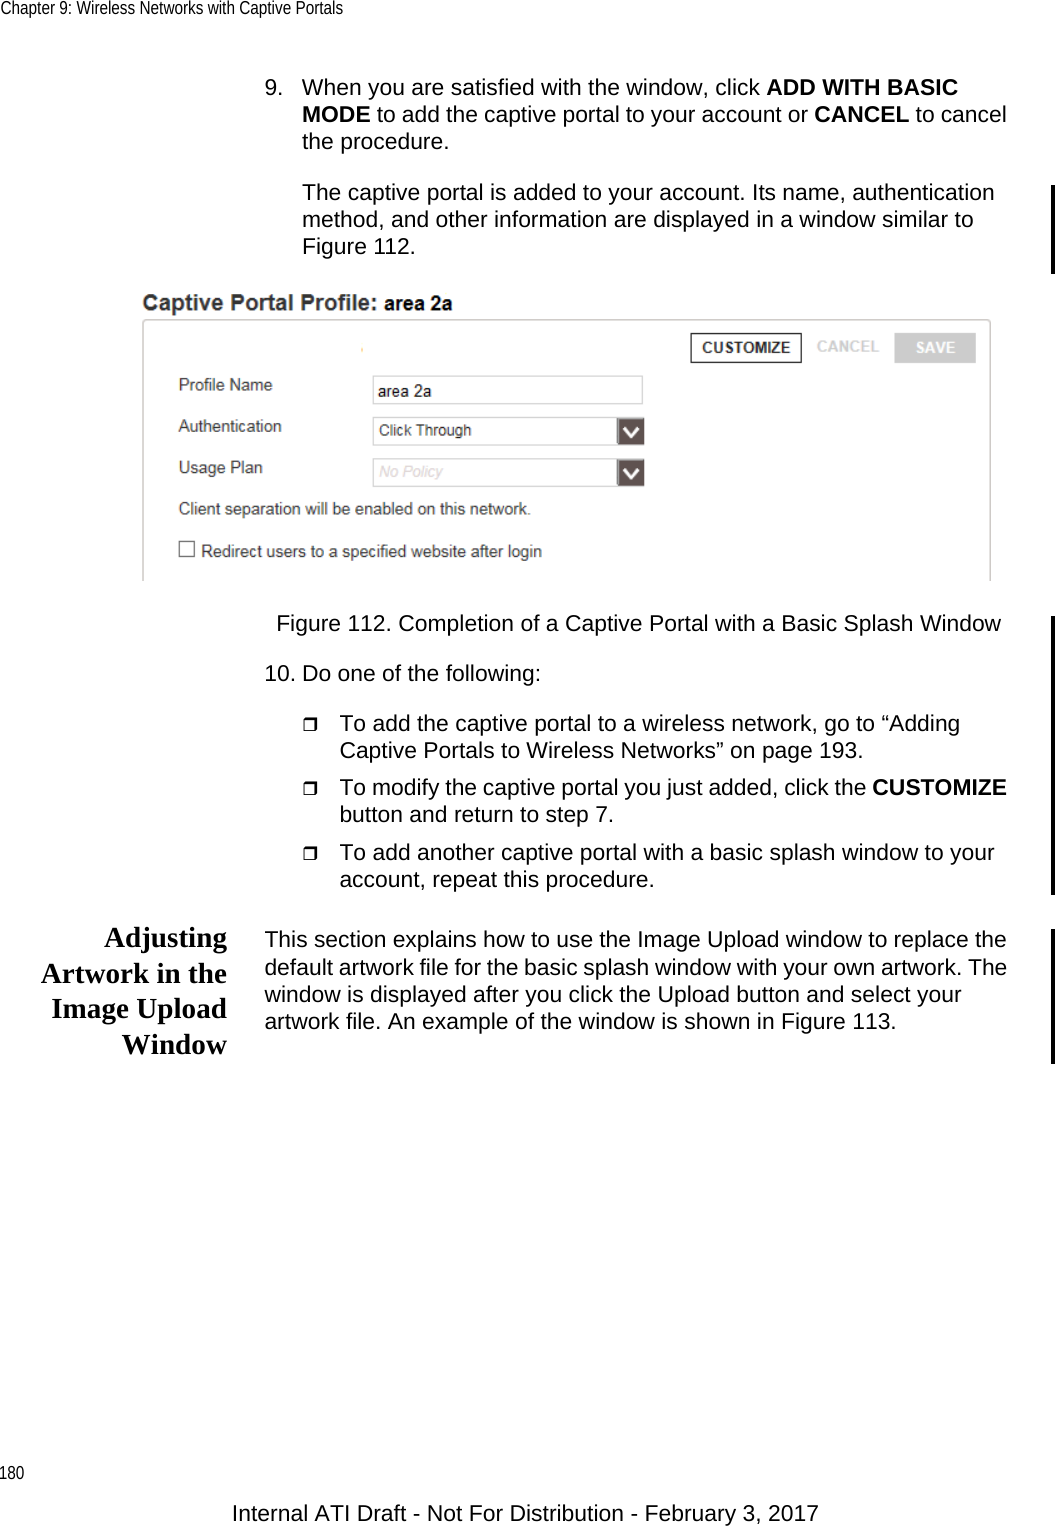 Chapter 9: Wireless Networks with Captive Portals1809. When you are satisfied with the window, click ADD WITH BASIC MODE to add the captive portal to your account or CANCEL to cancel the procedure.The captive portal is added to your account. Its name, authentication method, and other information are displayed in a window similar to Figure 112.Figure 112. Completion of a Captive Portal with a Basic Splash Window10. Do one of the following:To add the captive portal to a wireless network, go to “Adding Captive Portals to Wireless Networks” on page 193.To modify the captive portal you just added, click the CUSTOMIZE button and return to step 7.To add another captive portal with a basic splash window to your account, repeat this procedure.AdjustingArtwork in theImage UploadWindowThis section explains how to use the Image Upload window to replace the default artwork file for the basic splash window with your own artwork. The window is displayed after you click the Upload button and select your artwork file. An example of the window is shown in Figure 113.Internal ATI Draft - Not For Distribution - February 3, 2017